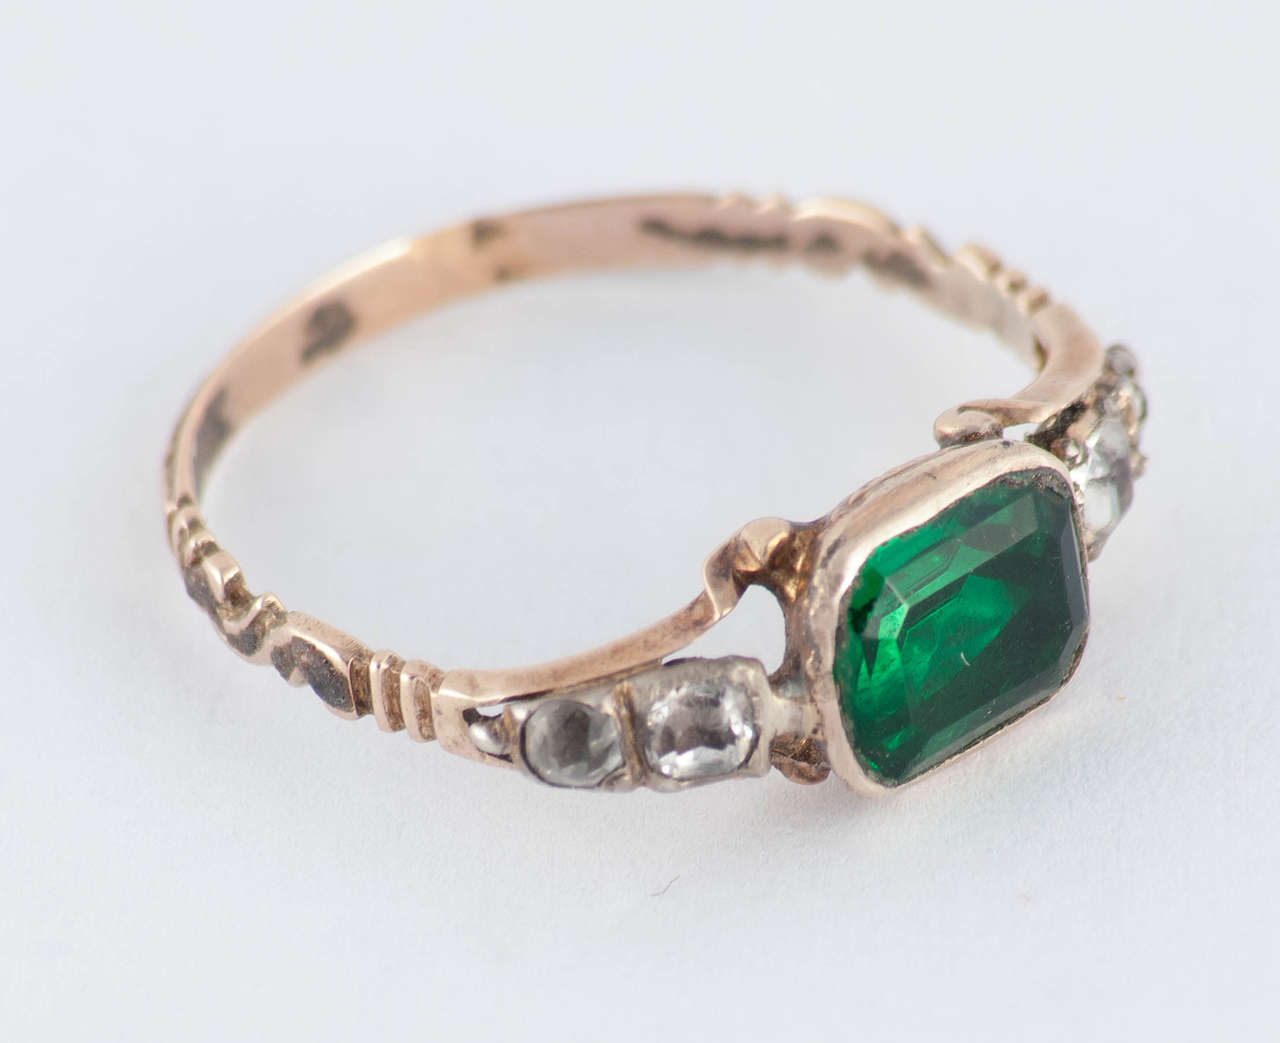 Georgian ring of green paste in a basket setting flanked by two clear pastes on each side. Paste is colored or clear glass, often lead or flint, cut in the same fashion as gemstones and used as a substitute especially while traveling. Antique paste